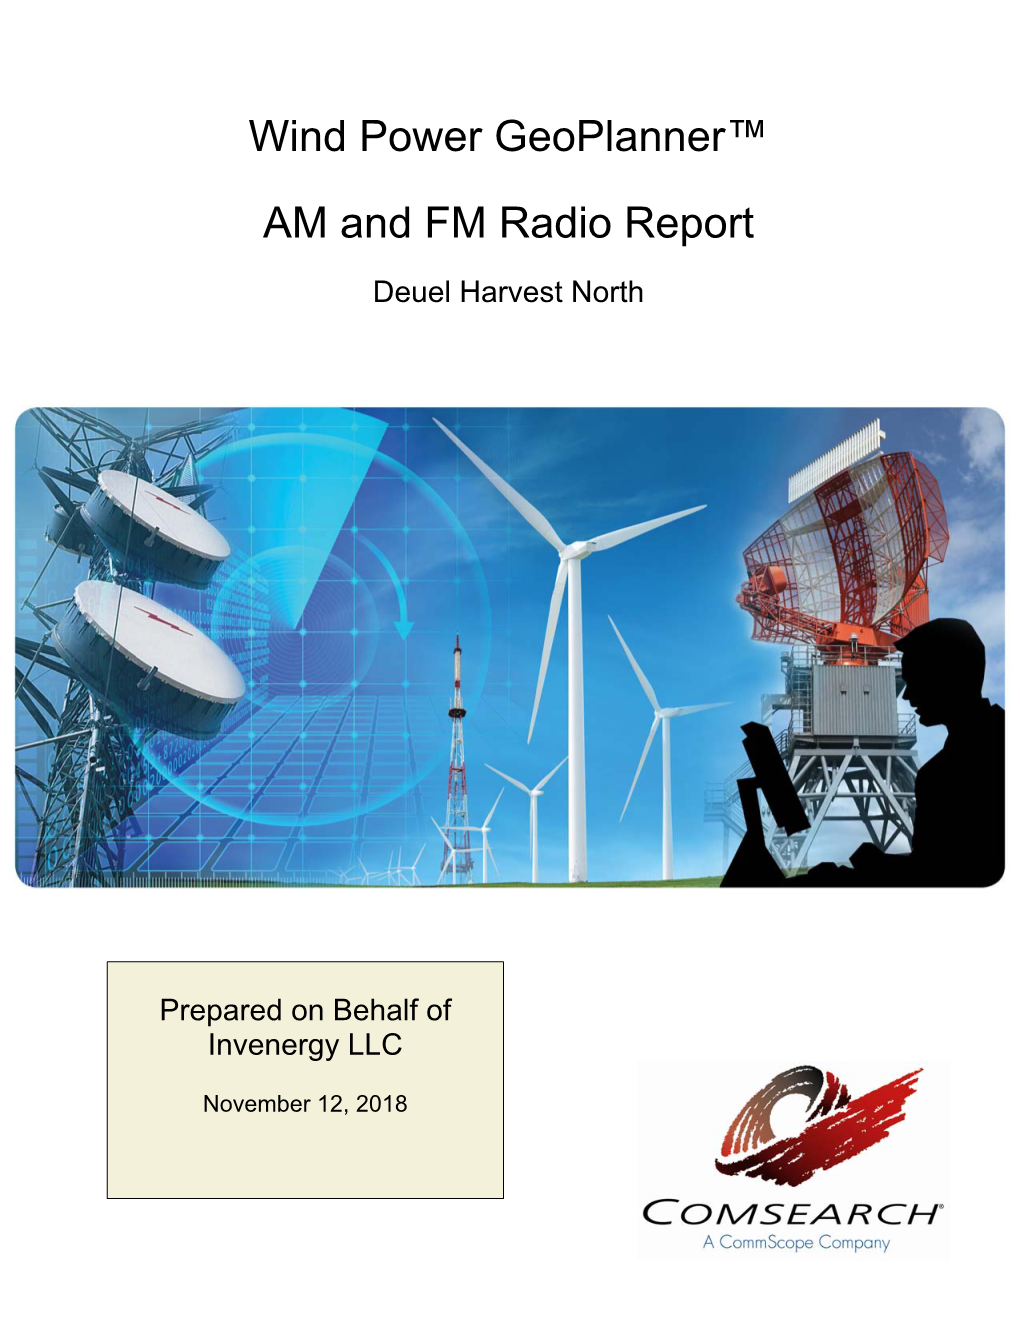 Wind Power Geoplanner™ AM and FM Radio Report COMSEARCH a Commscope Company Deuel Harvest North